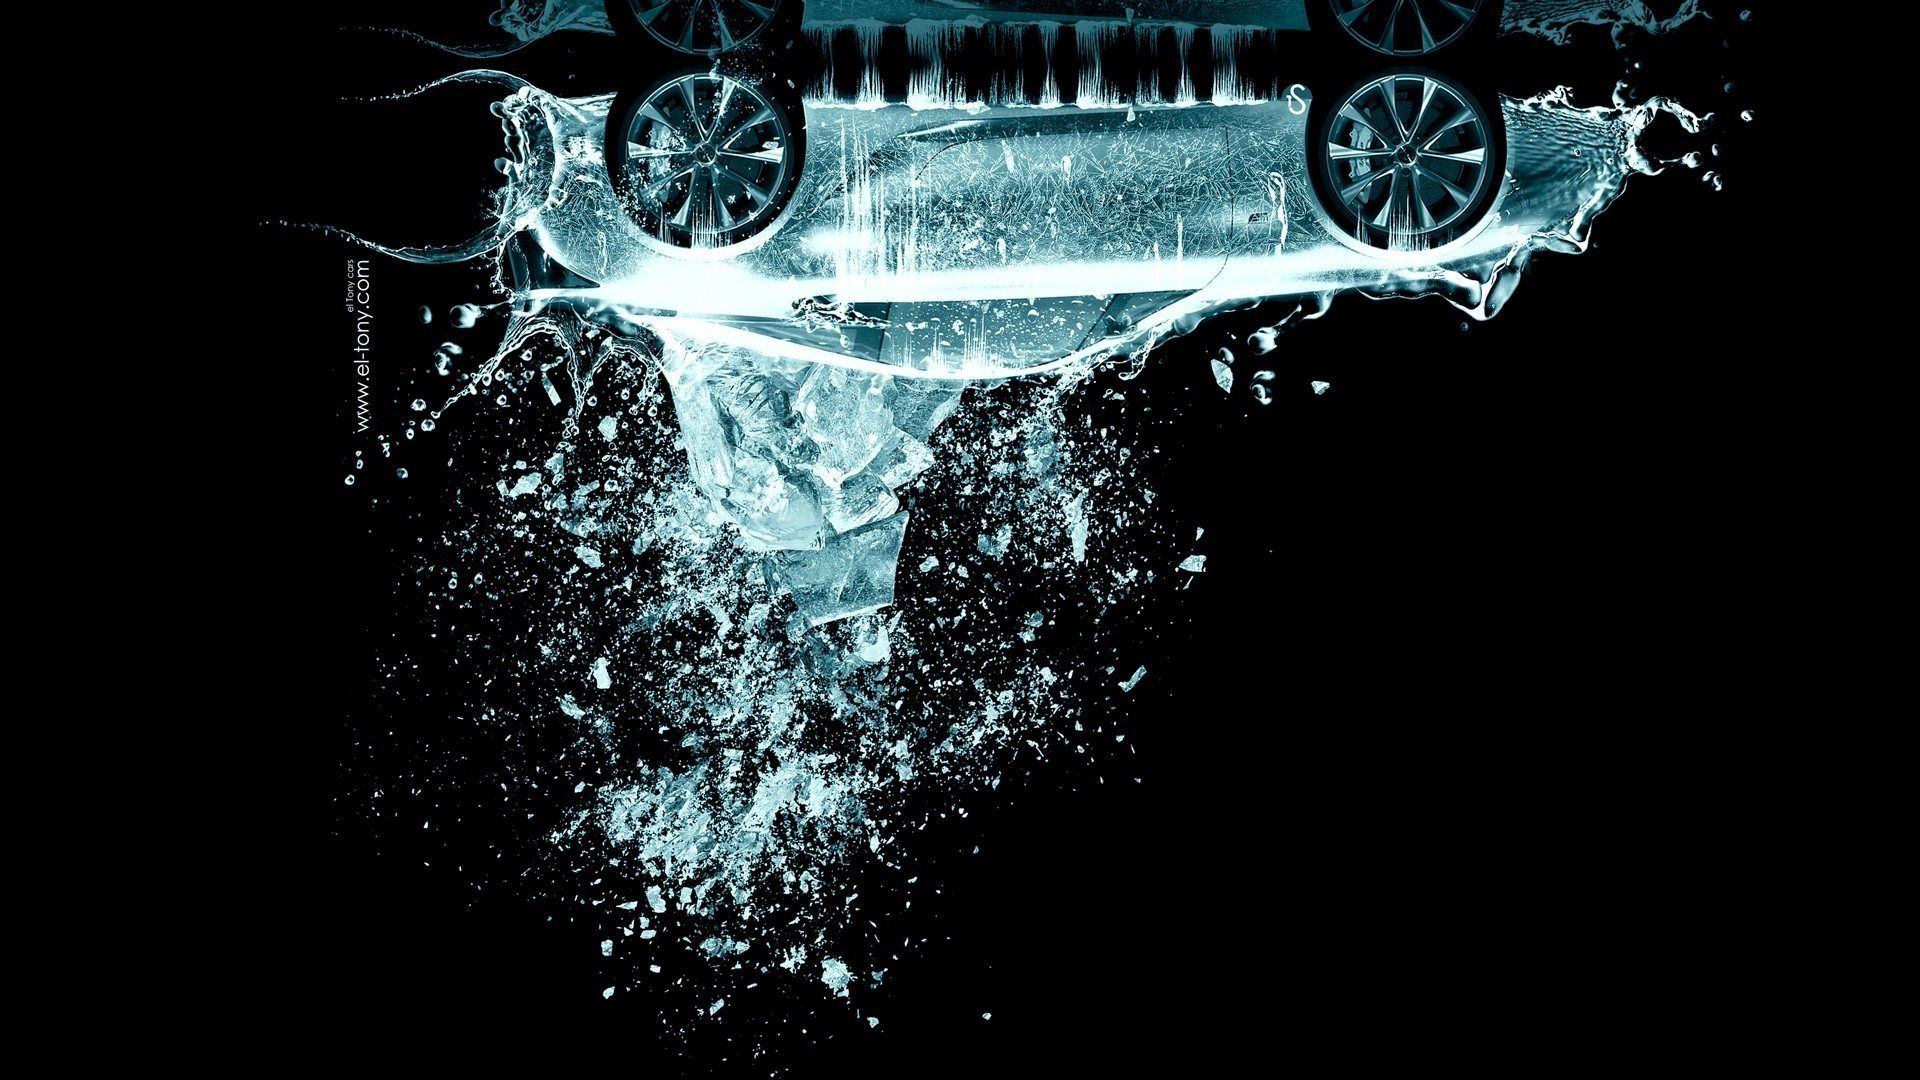 Design Talent Showcase Tony.com Brings Sensual Elements Fire And Water To YOUR Car Wallpaper